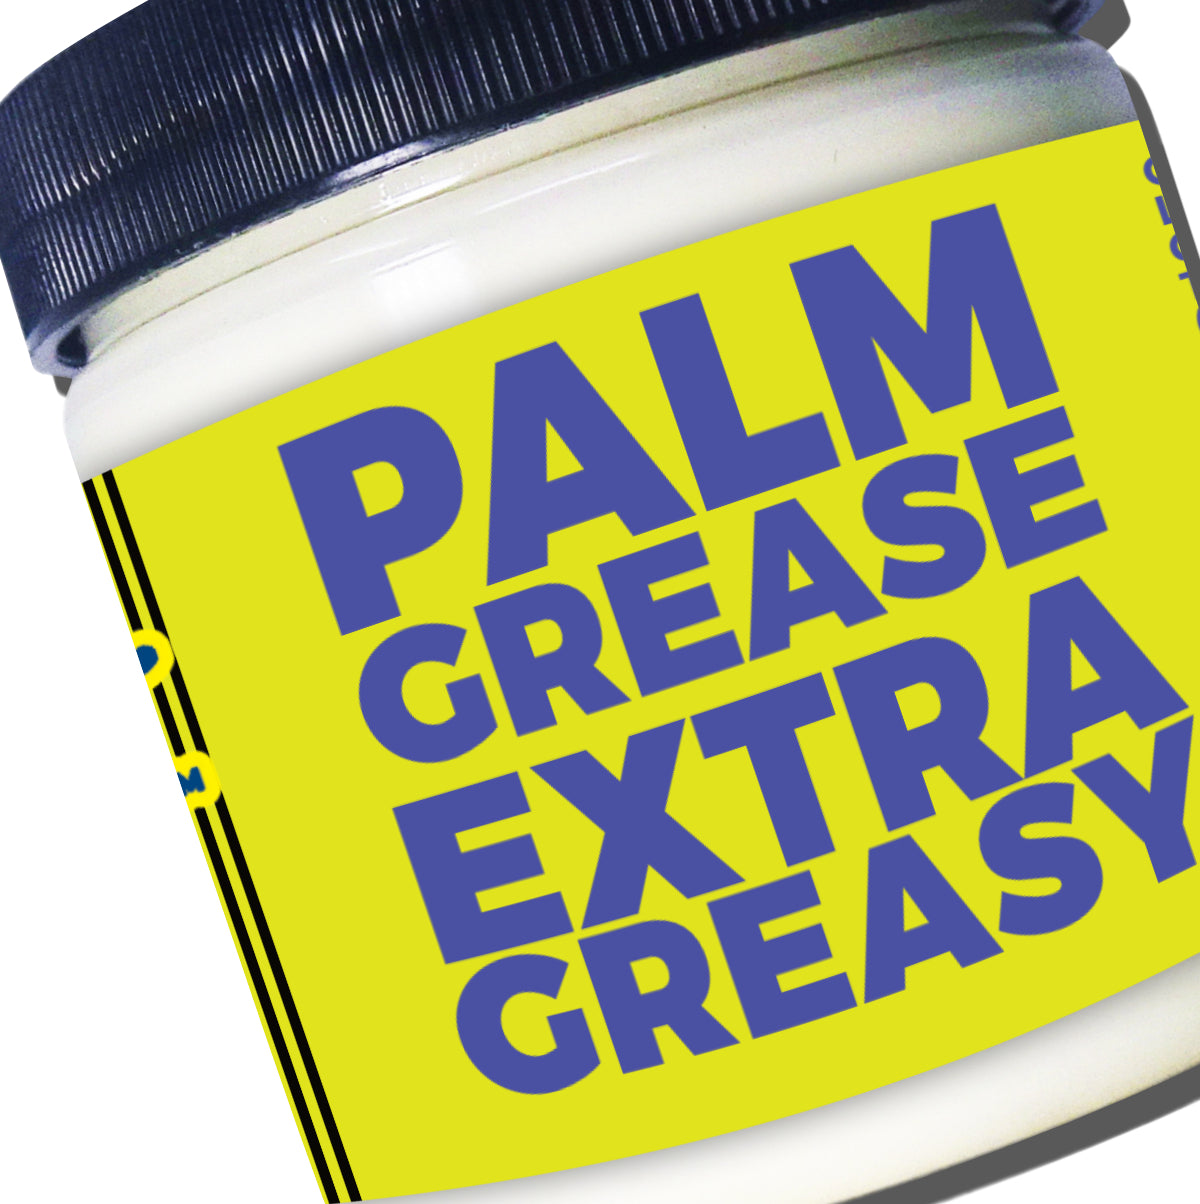 Palm Grease: EXTRA GREASY